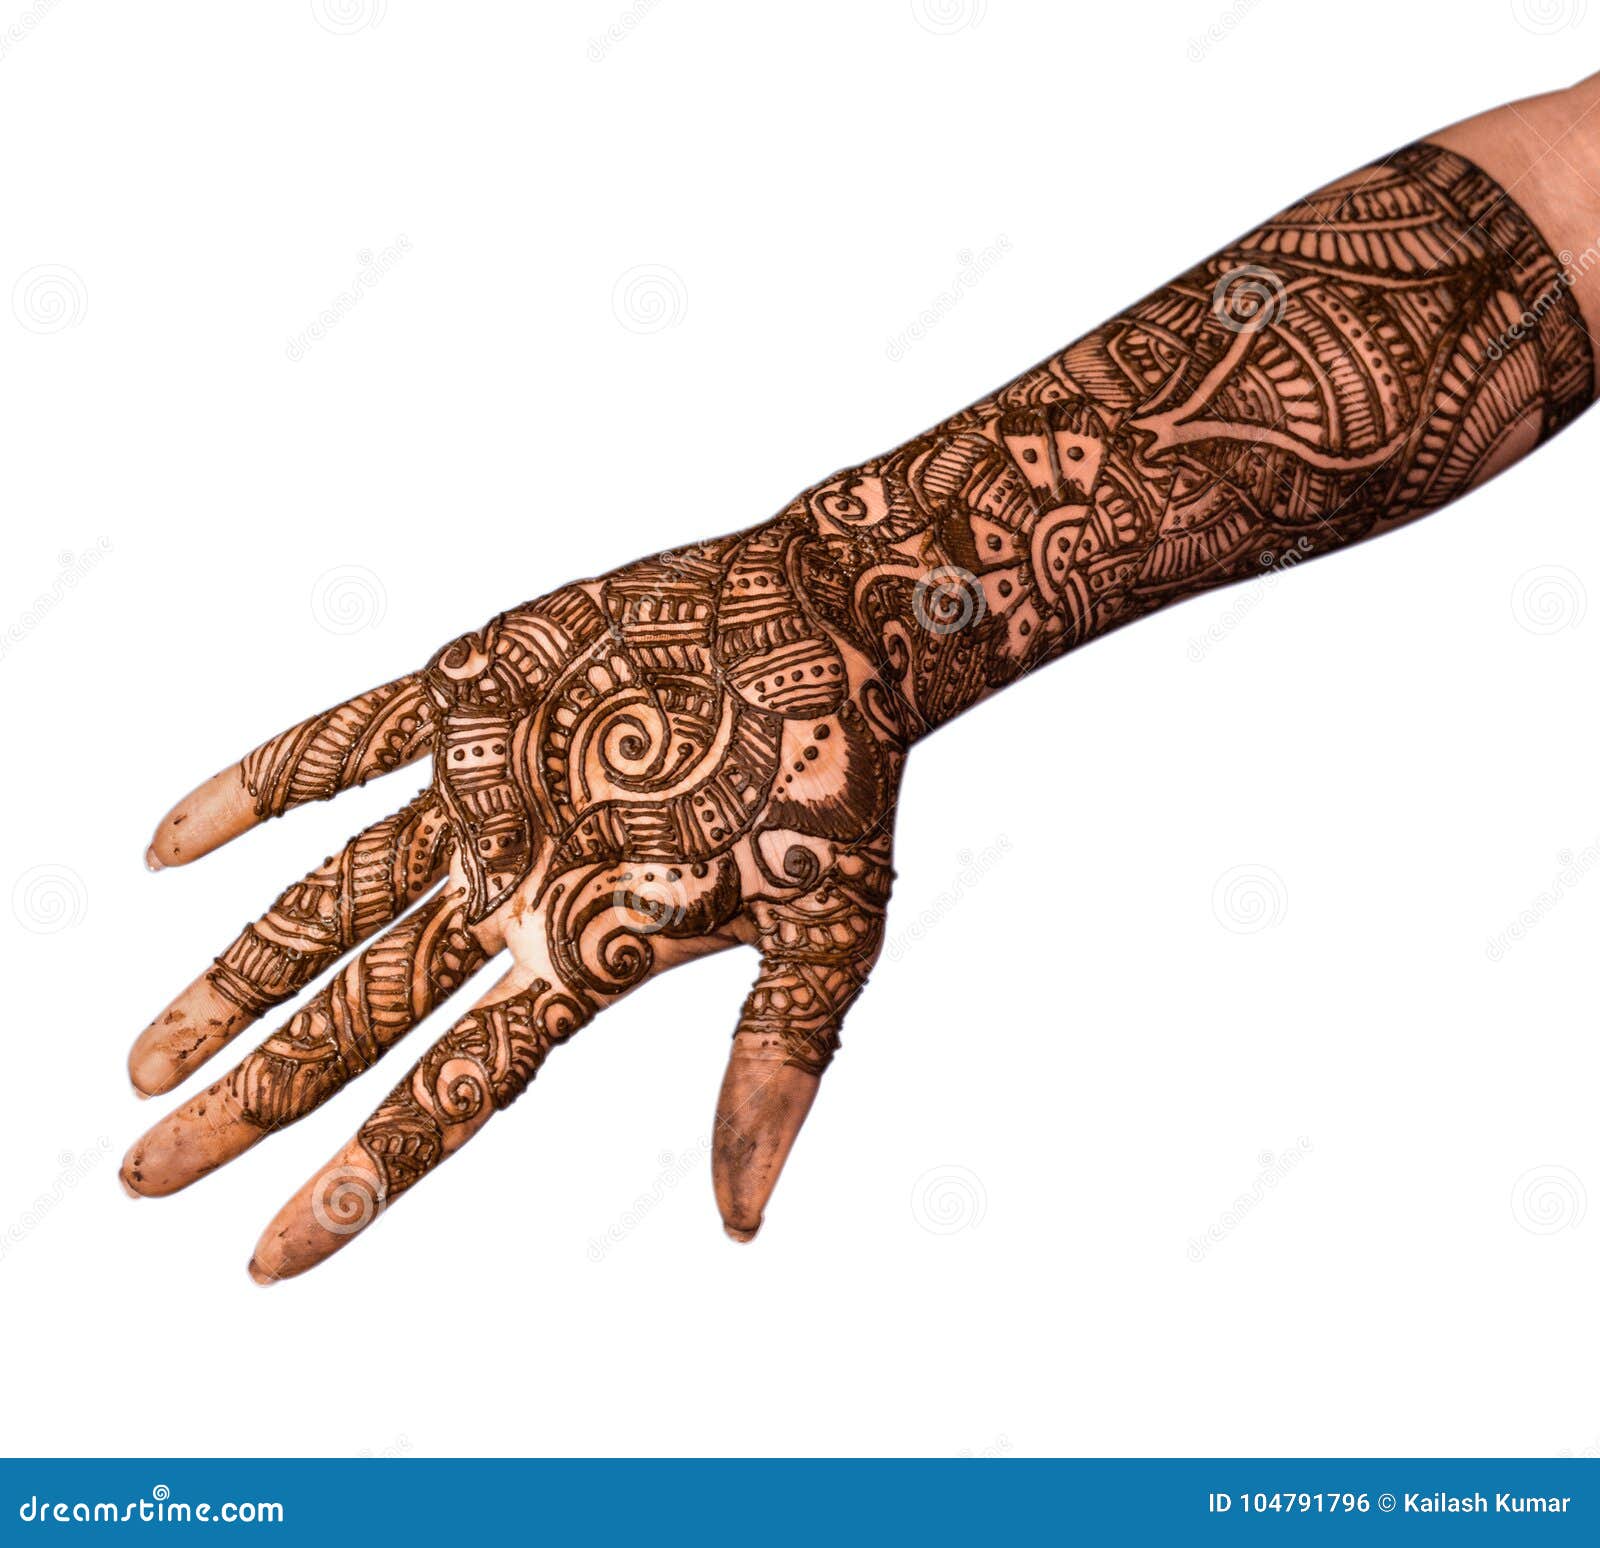 Full 4K Collection of Amazing Mehandi Designs Images- Free Download